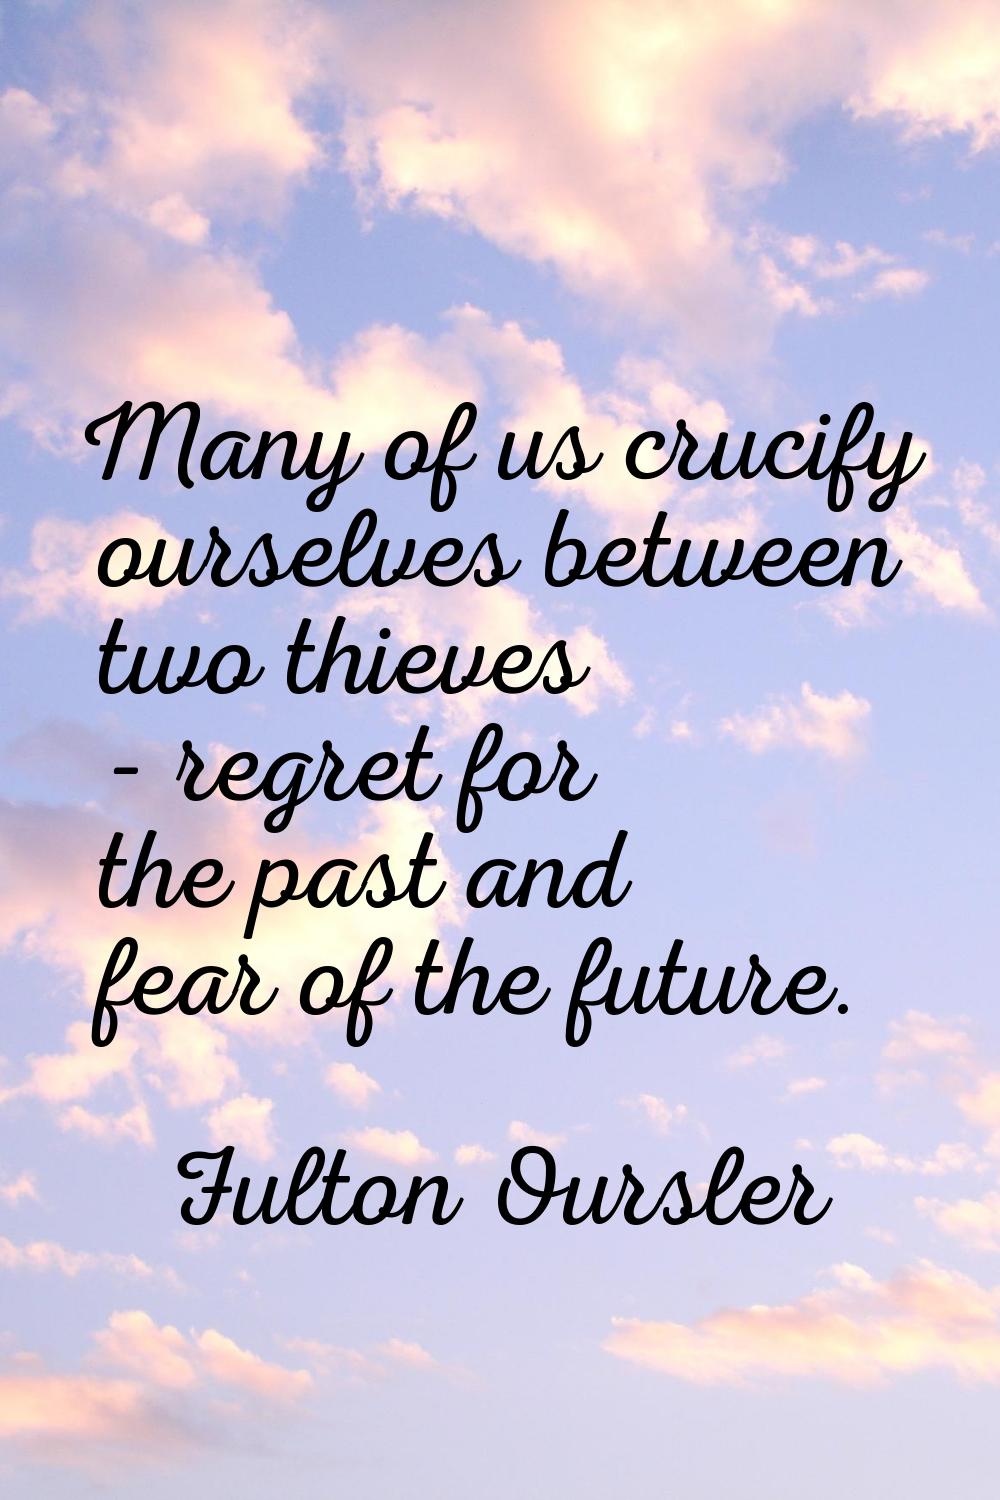 Many of us crucify ourselves between two thieves - regret for the past and fear of the future.